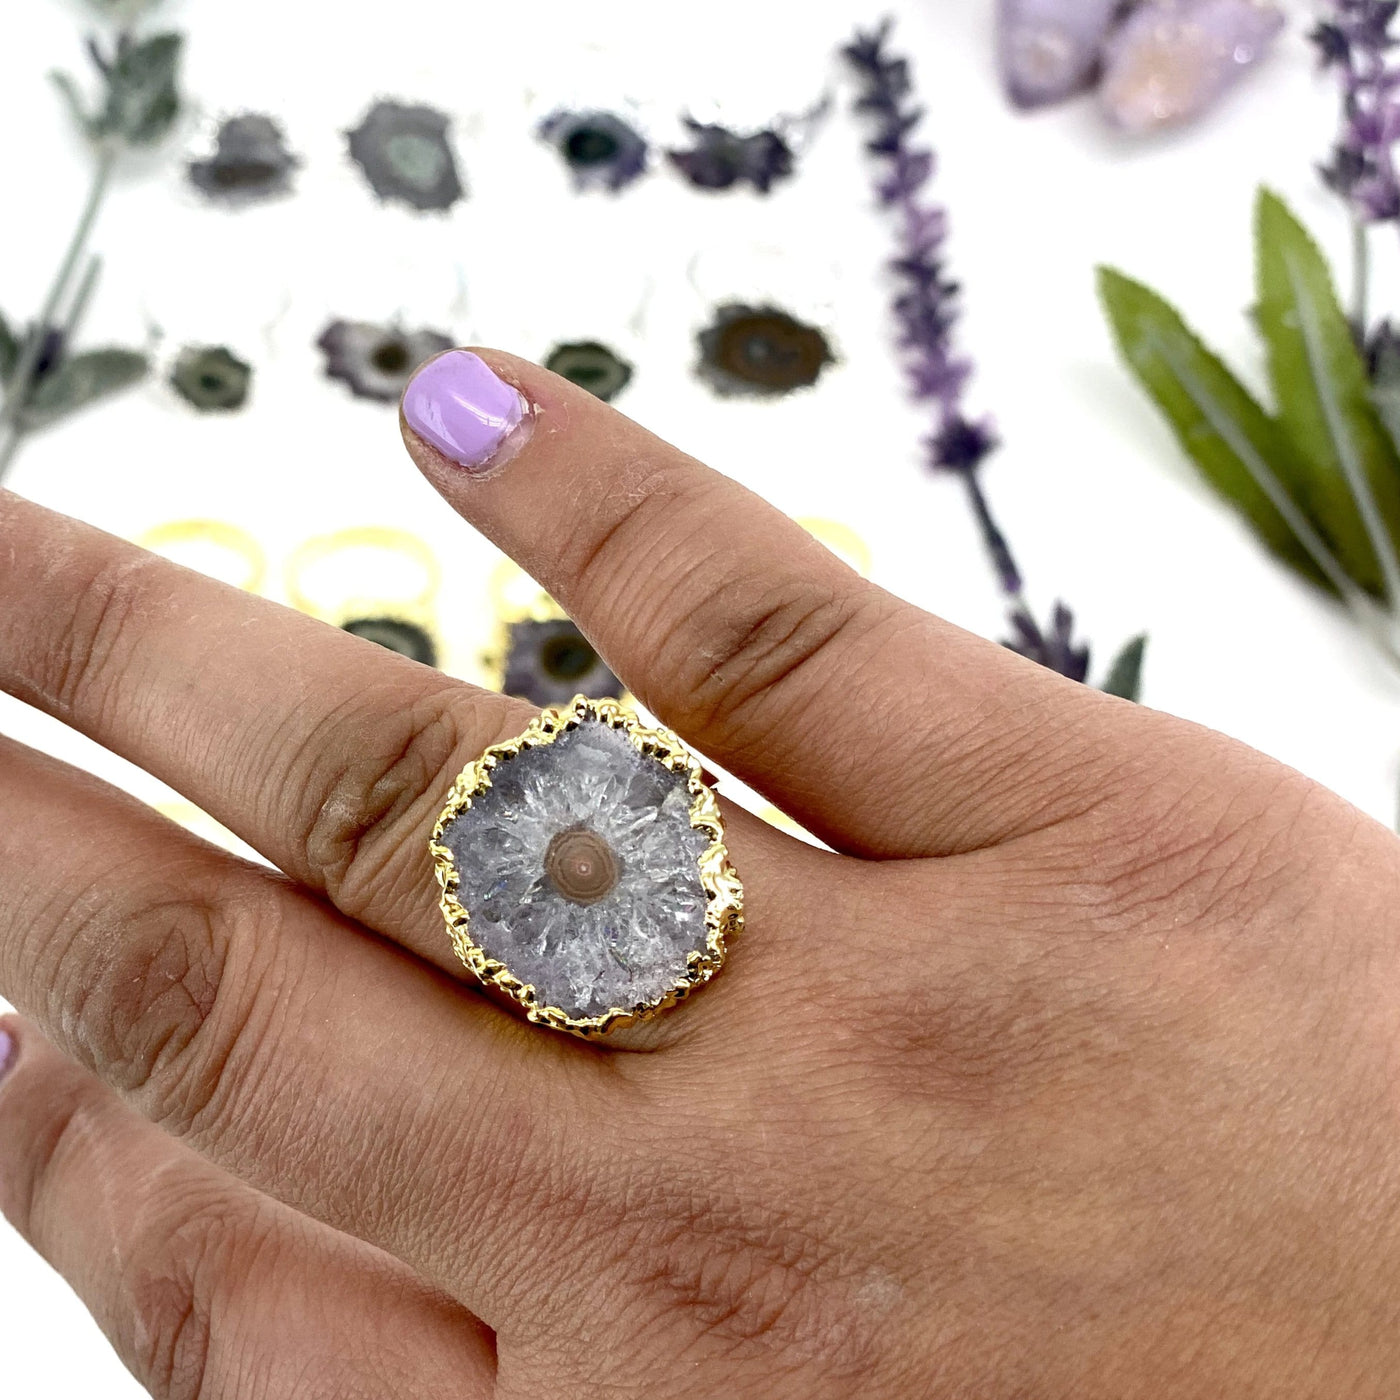 hand wearing gold amethyst stalactite ring with decorations blurred in the background